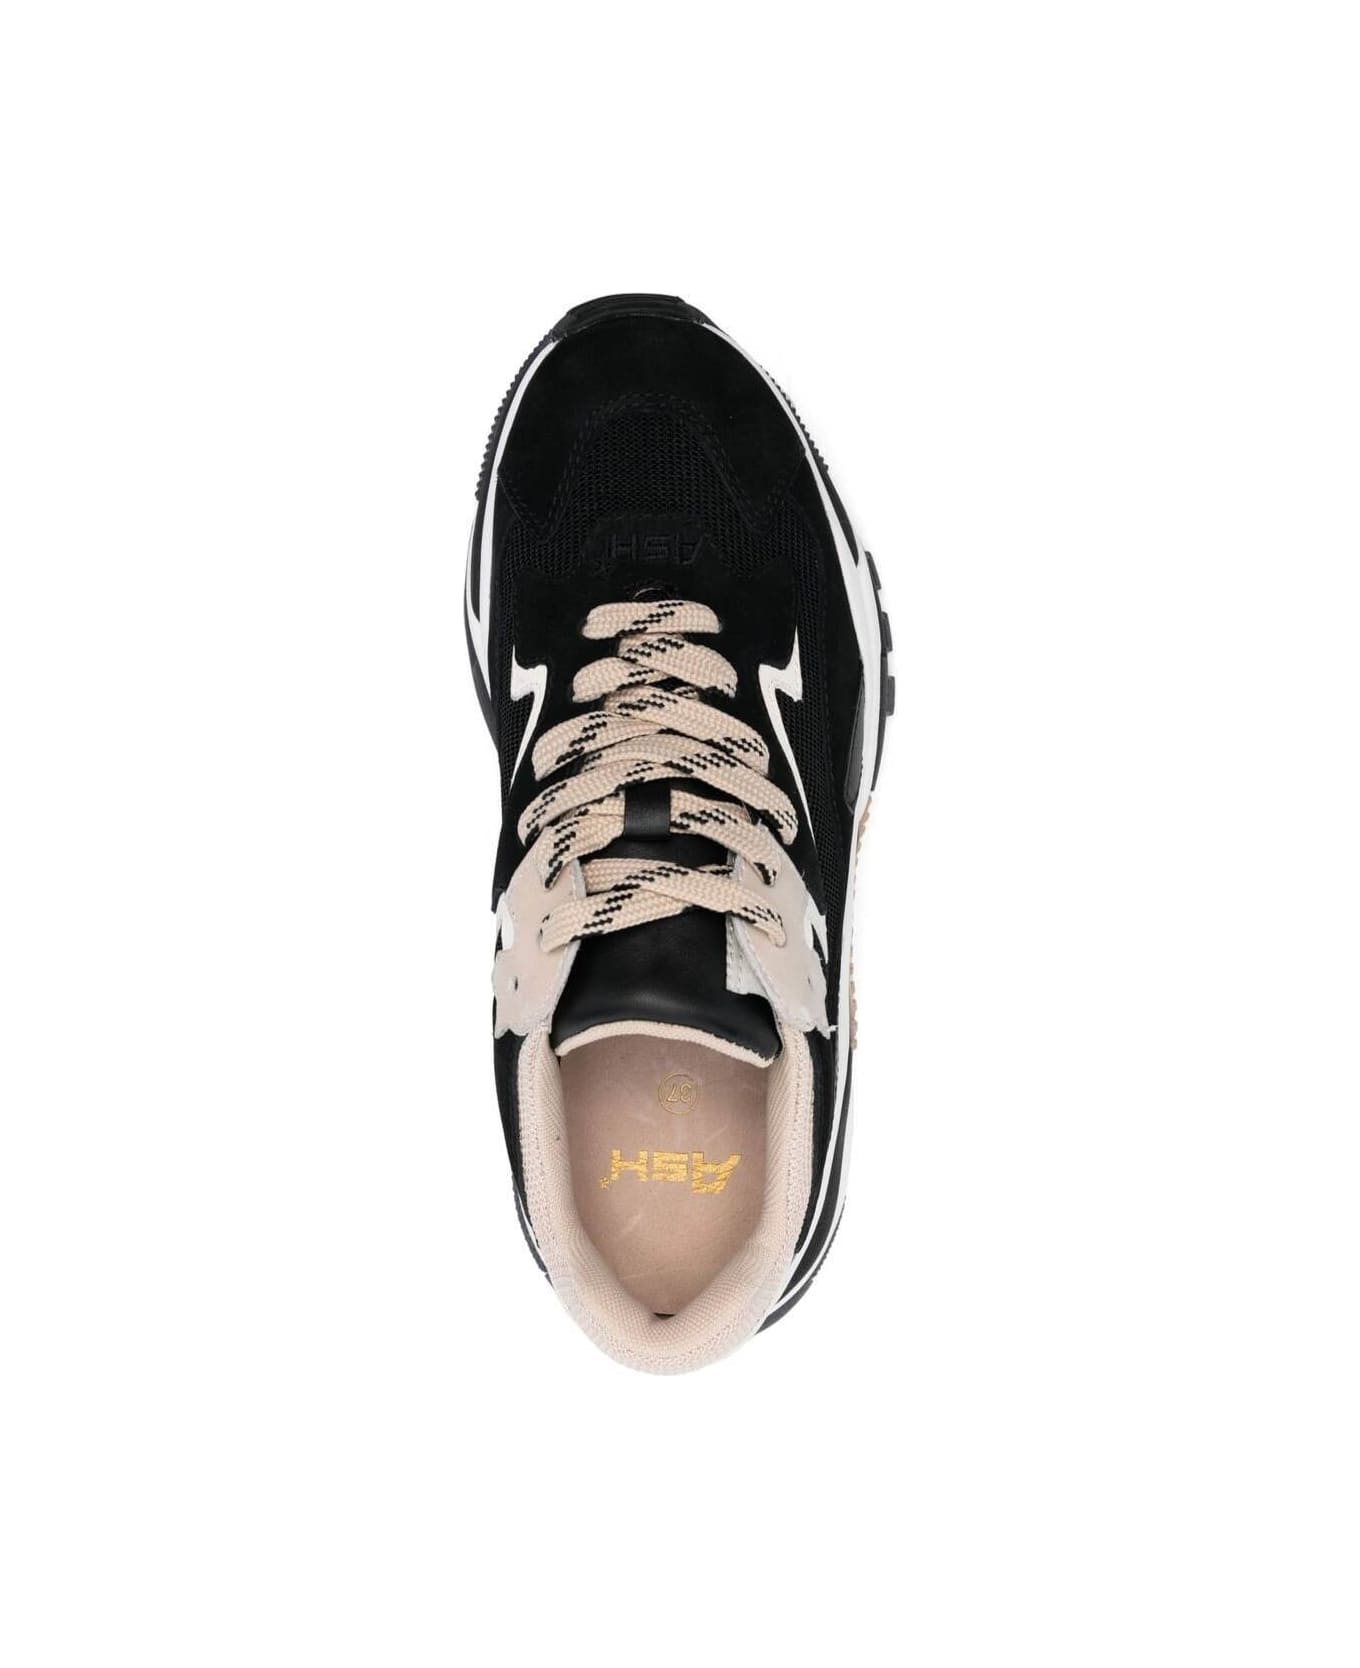 Ash 'addict' Black Sneakers With White And Beige Inserts In Leather Woman - Black